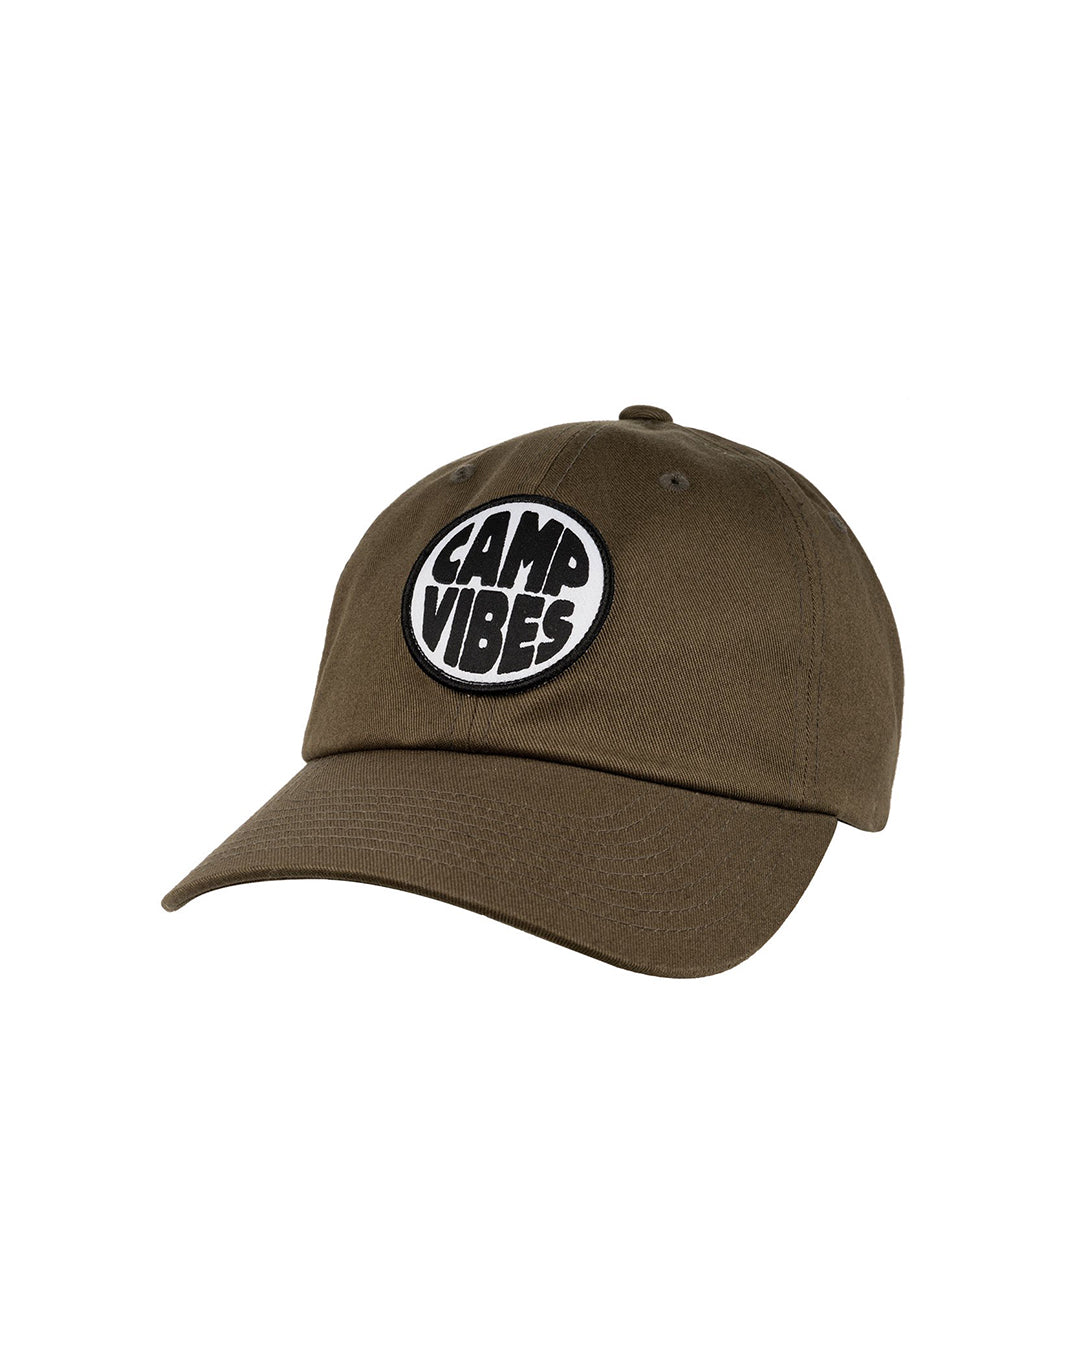 POLeR CAMP VIBES PATCH DAD HAT